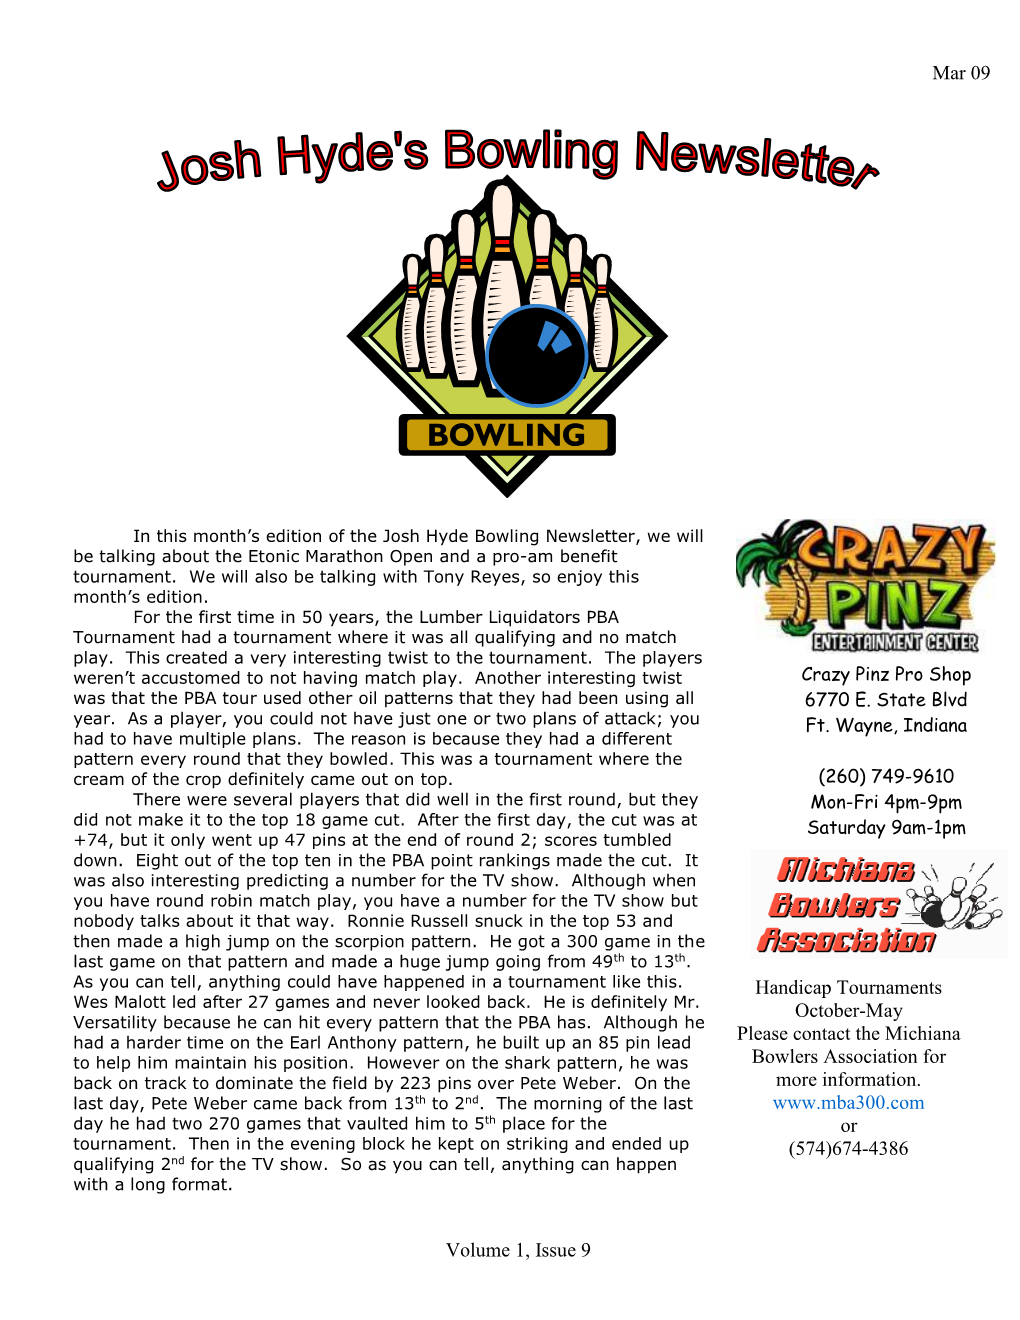 Mar 09 Volume 1, Issue 9 Handicap Tournaments October-May Please